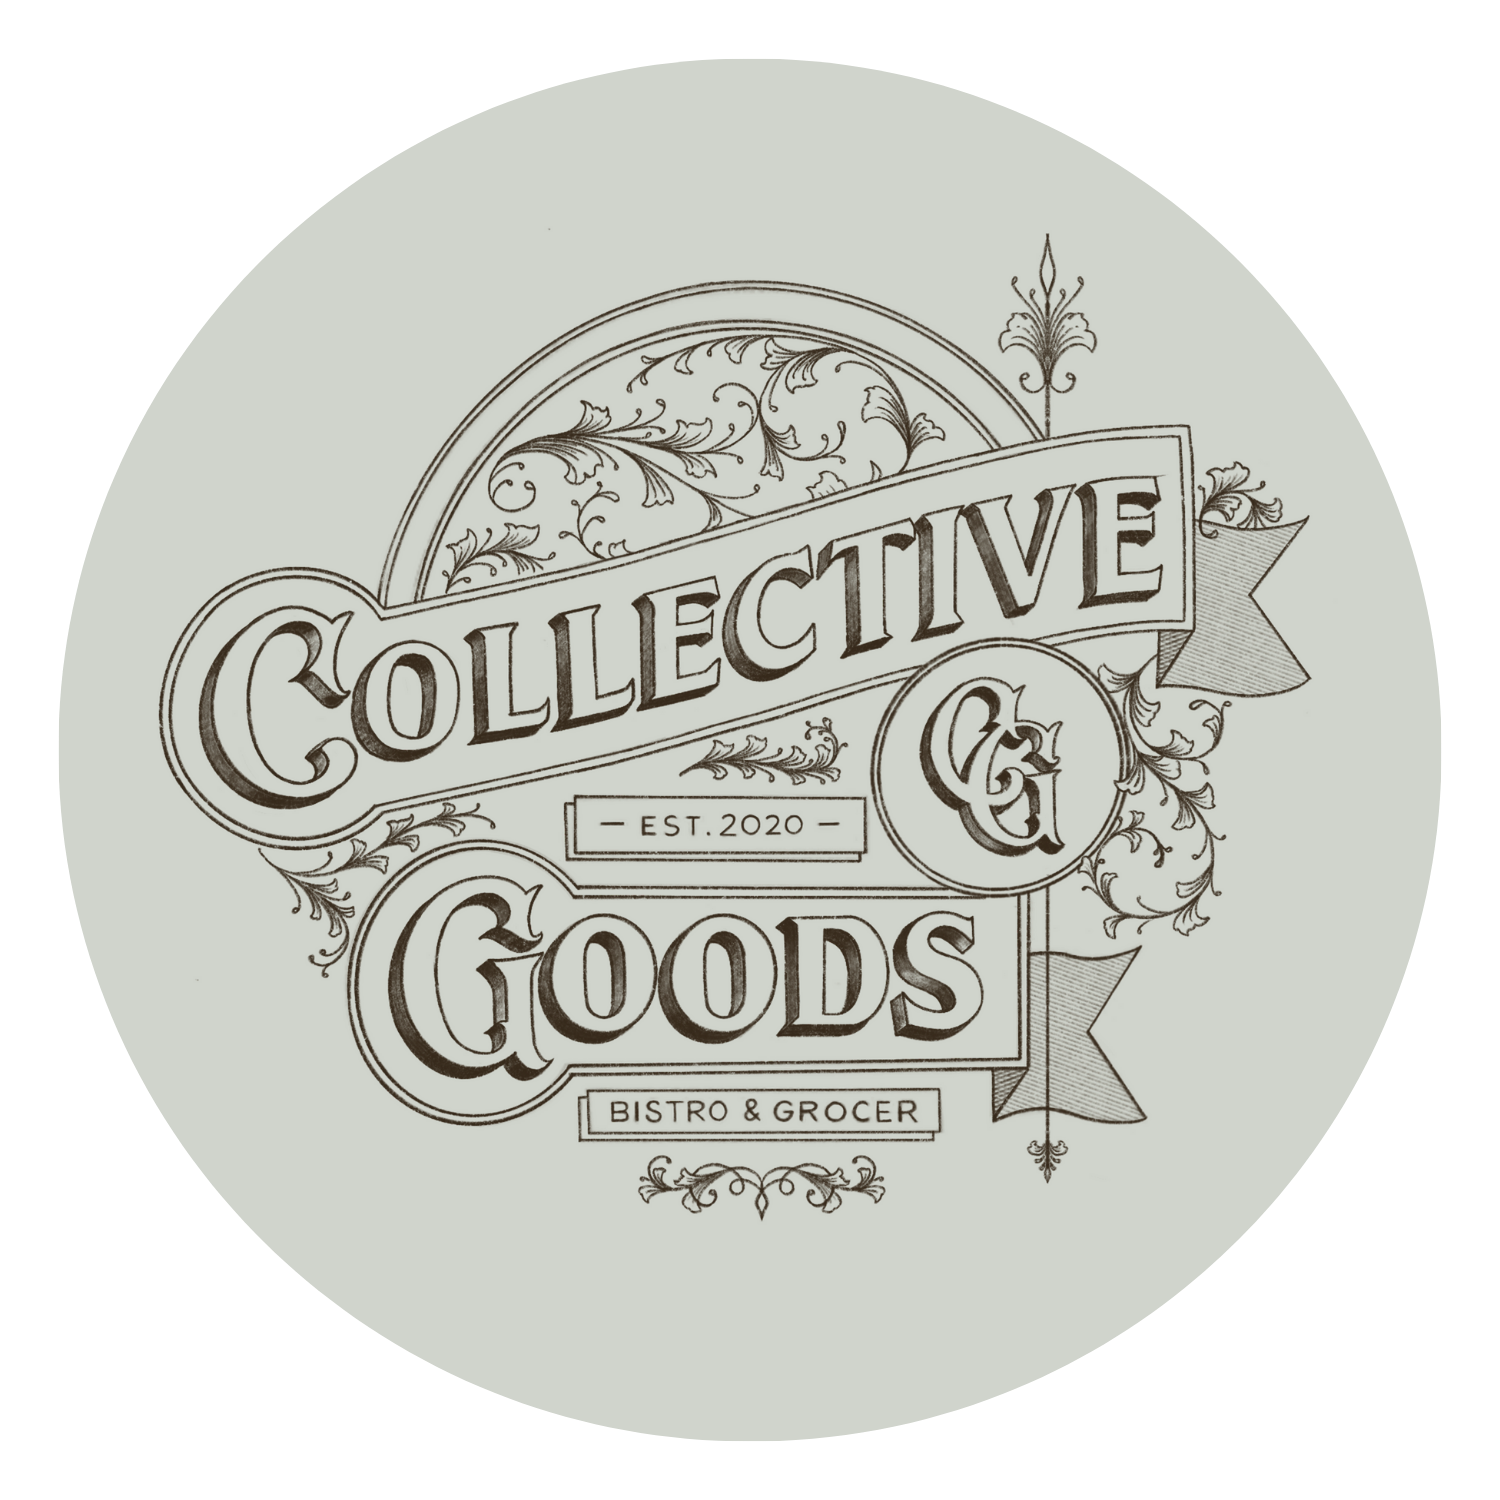 Collective Goods